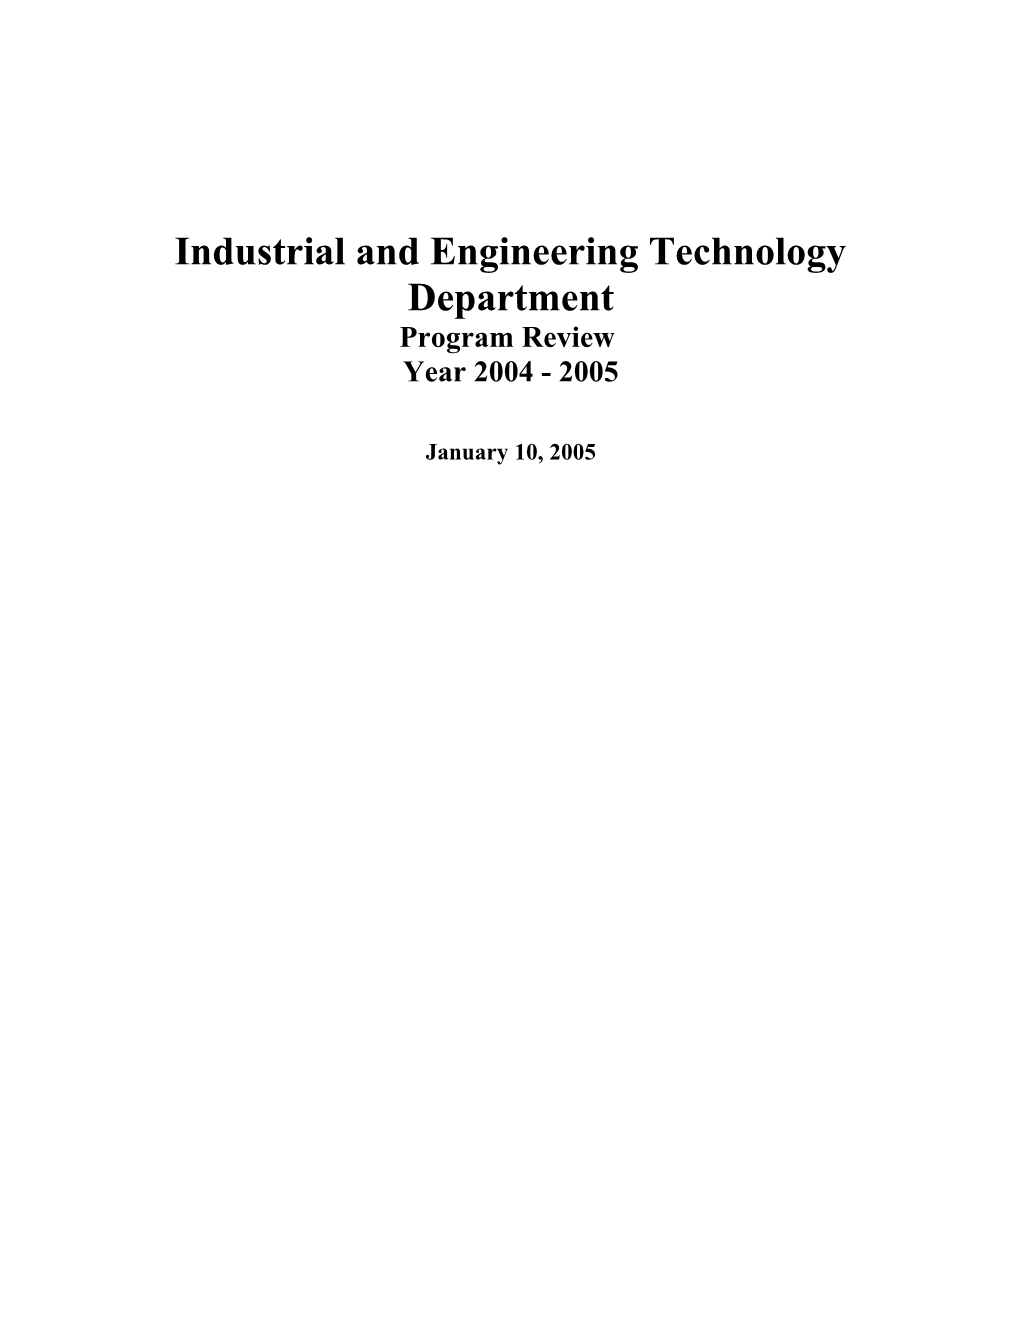 Industrial and Engineering Technology Department